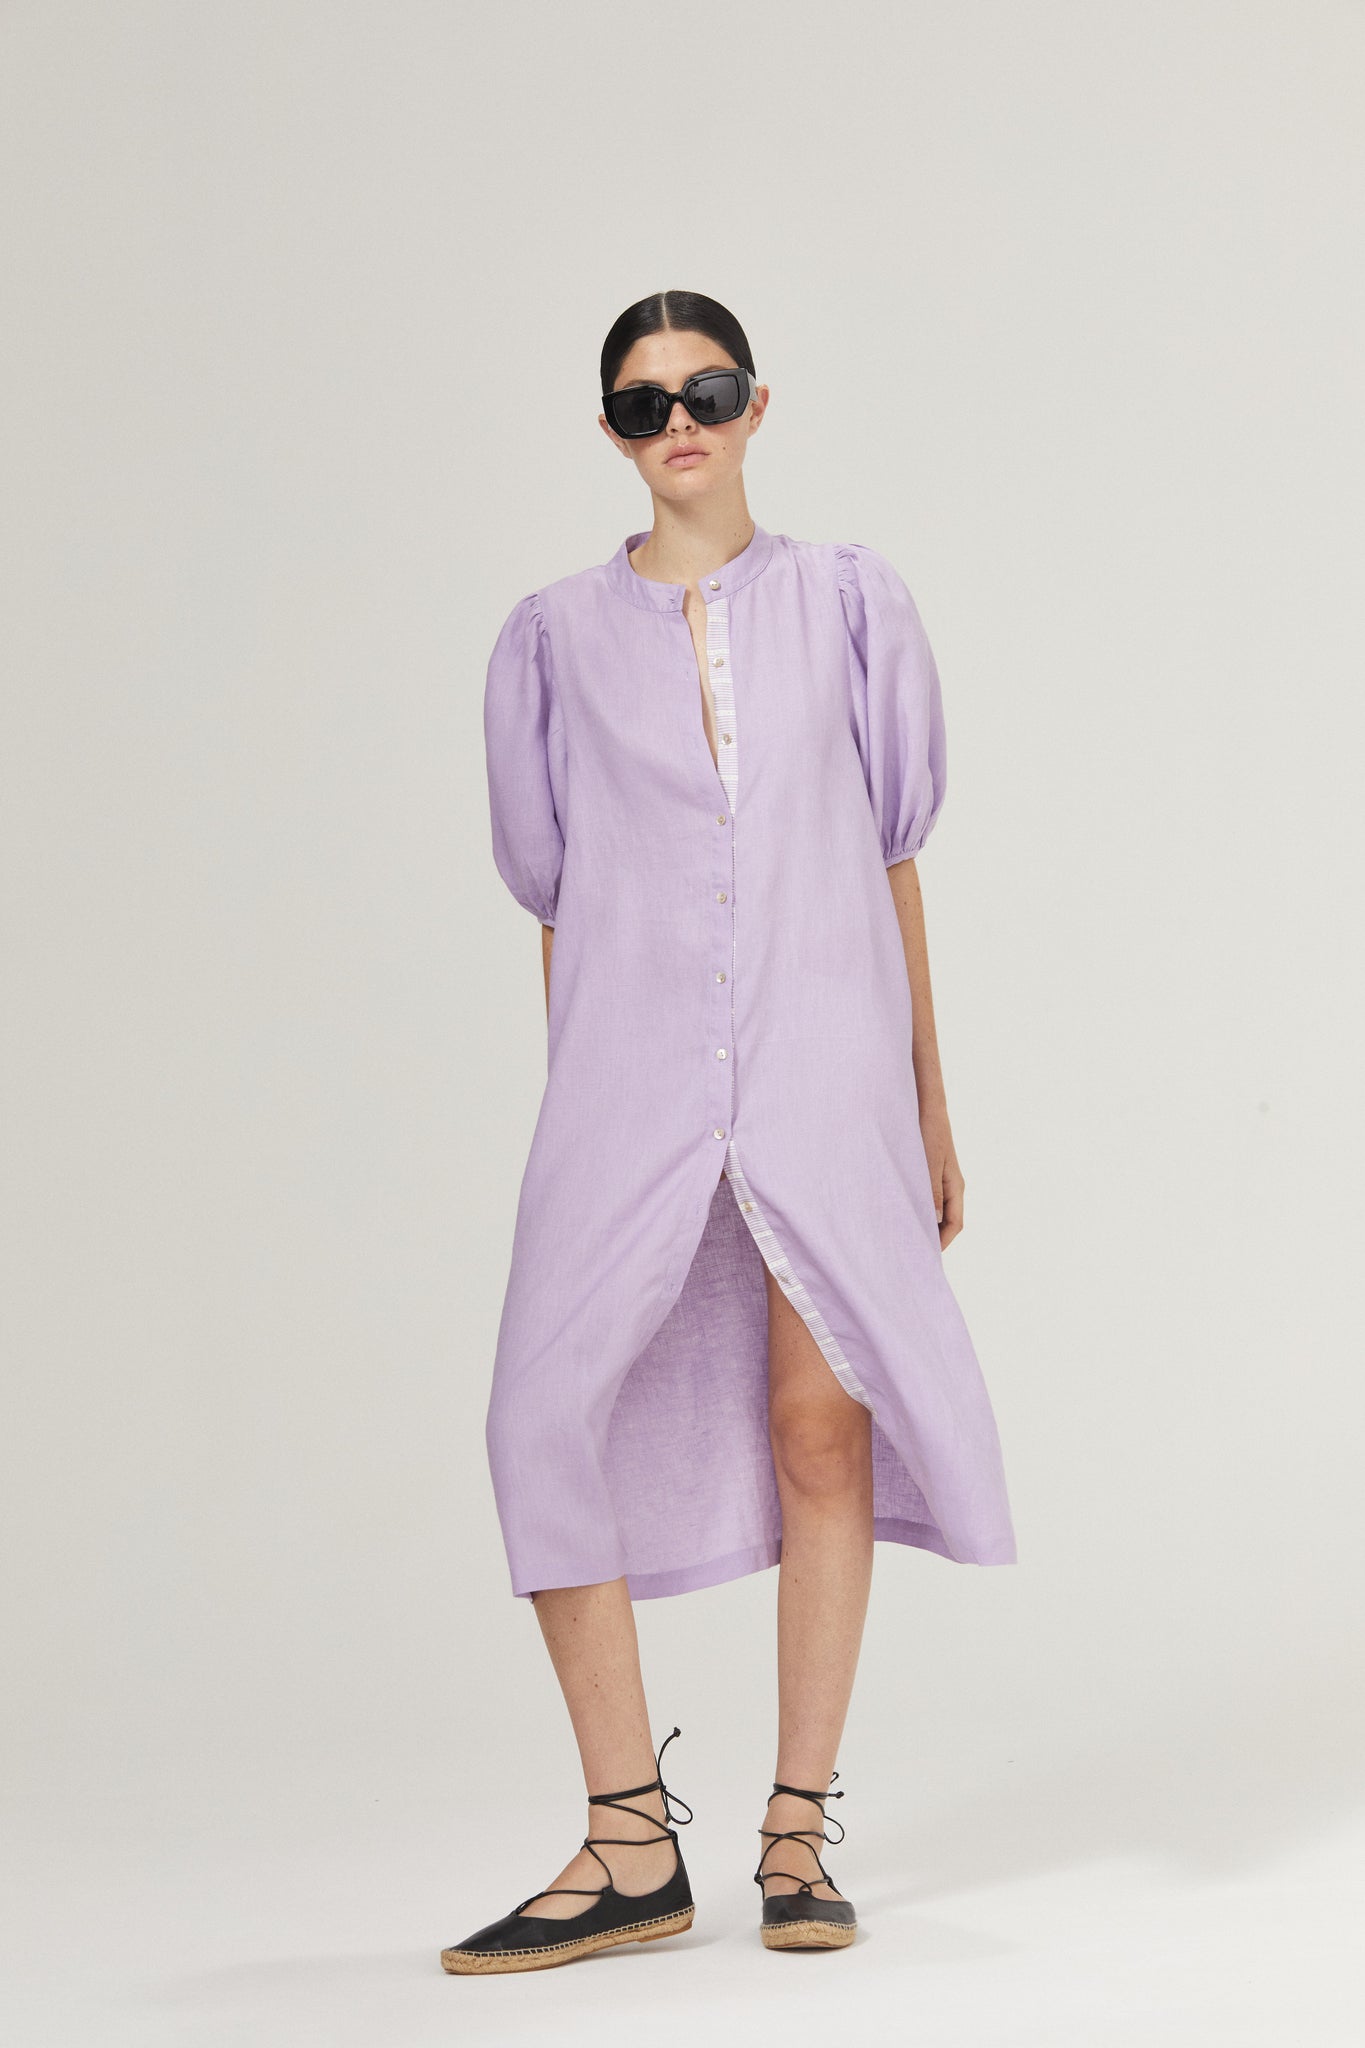 Bubble Linen Dress - Bright Lilac with Contrasting Details